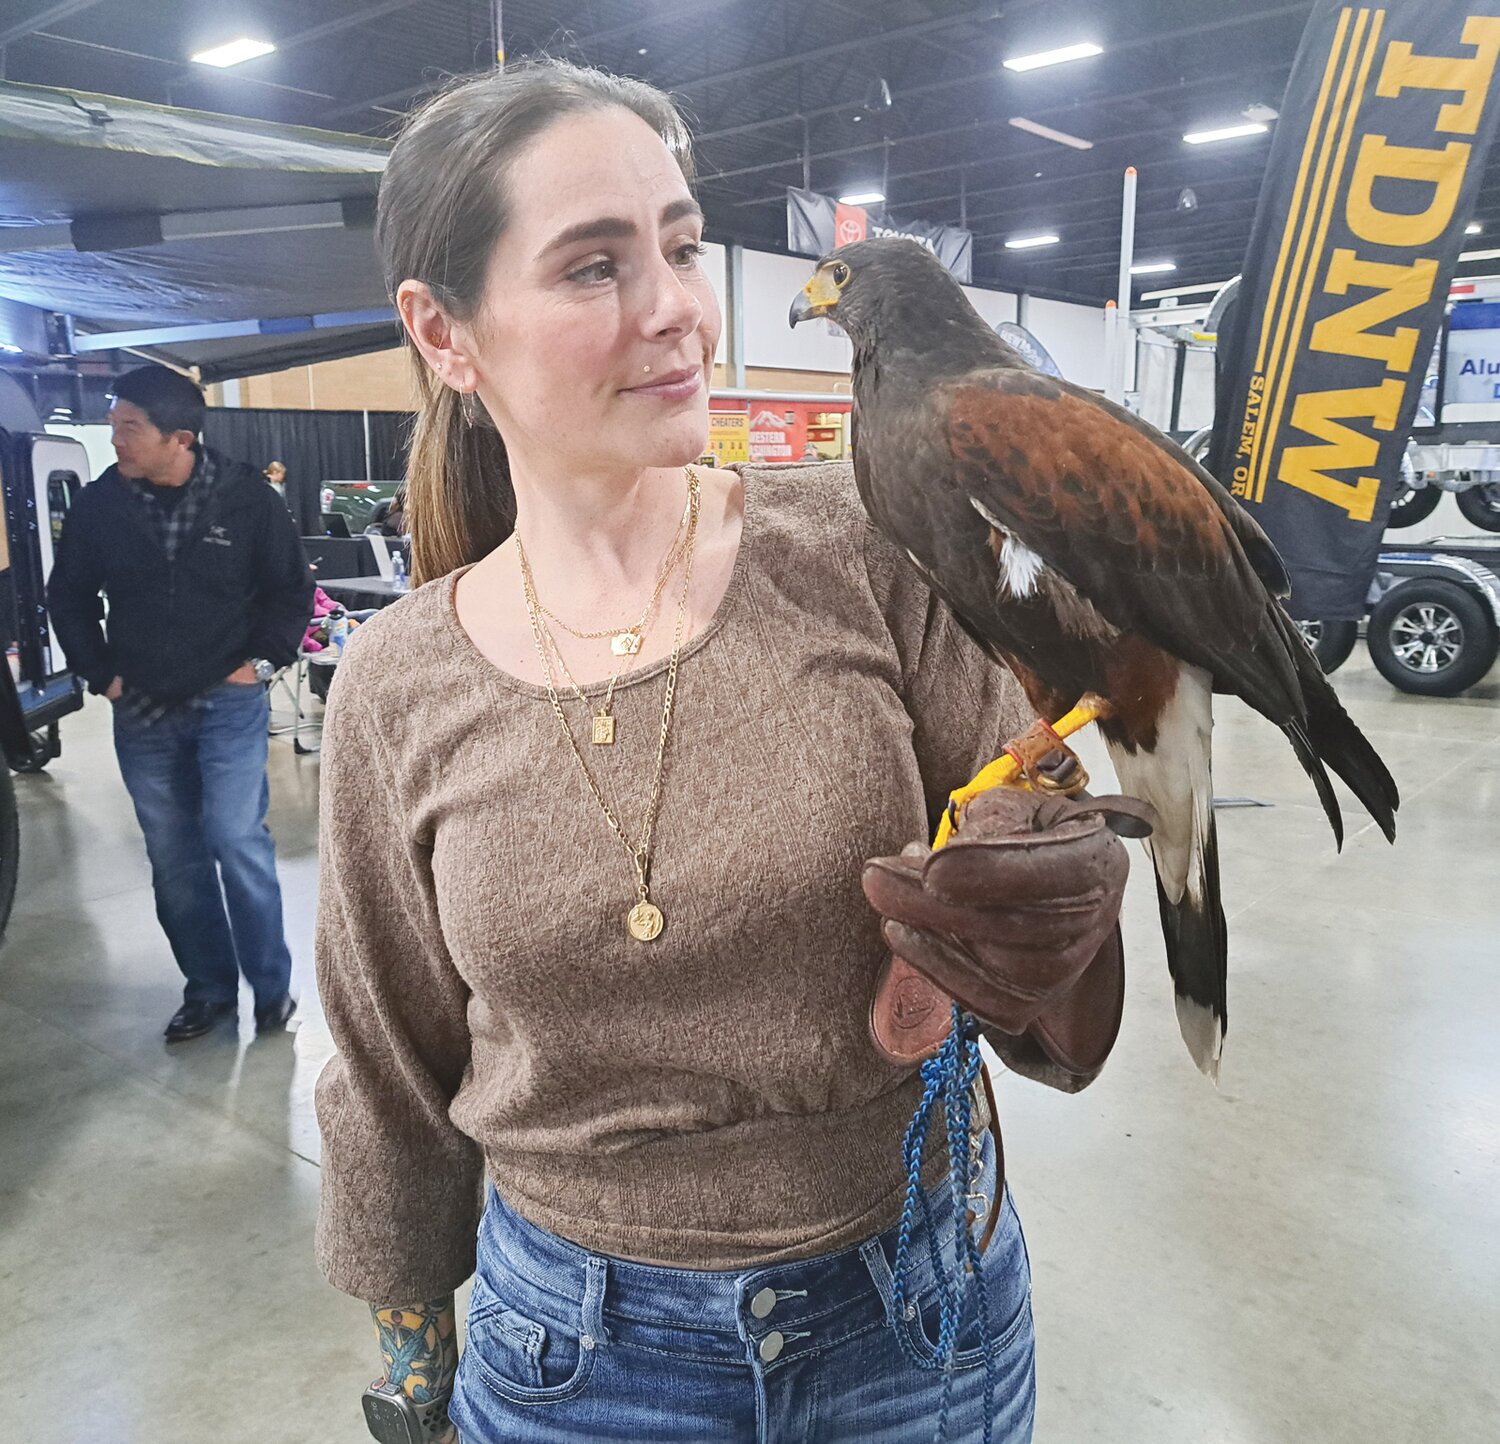 Meeting new people and raptors at the Washington Sportsmen’s Show.
Courtesy John Kruse